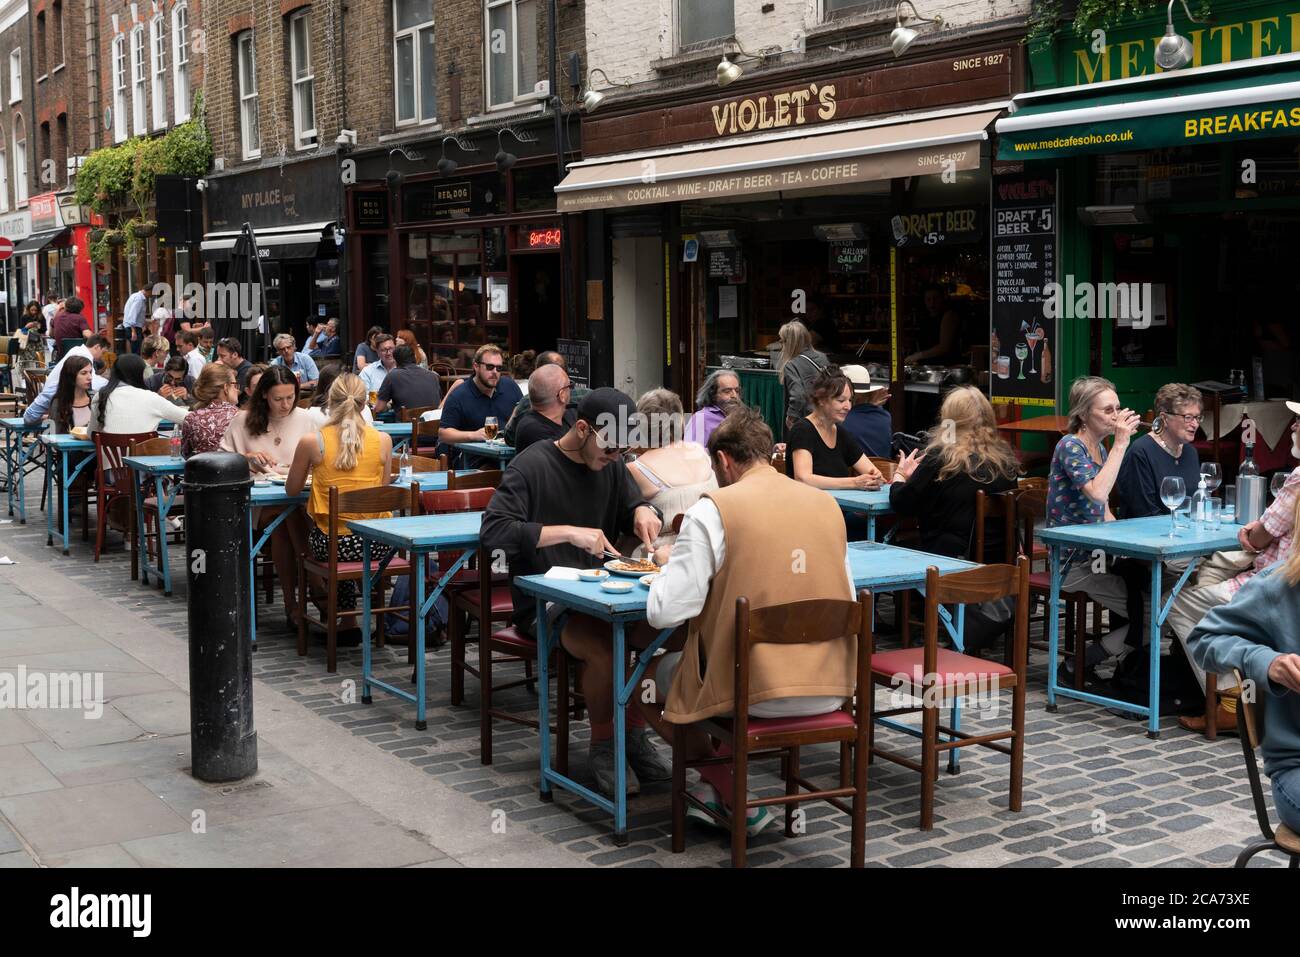 Diners eat food at outdoor restaurant tables in Soho during the Eat Out to Help Out scheme offering diners a discount off meals to help boost restaurants and pubs post-lockdown. Stock Photo